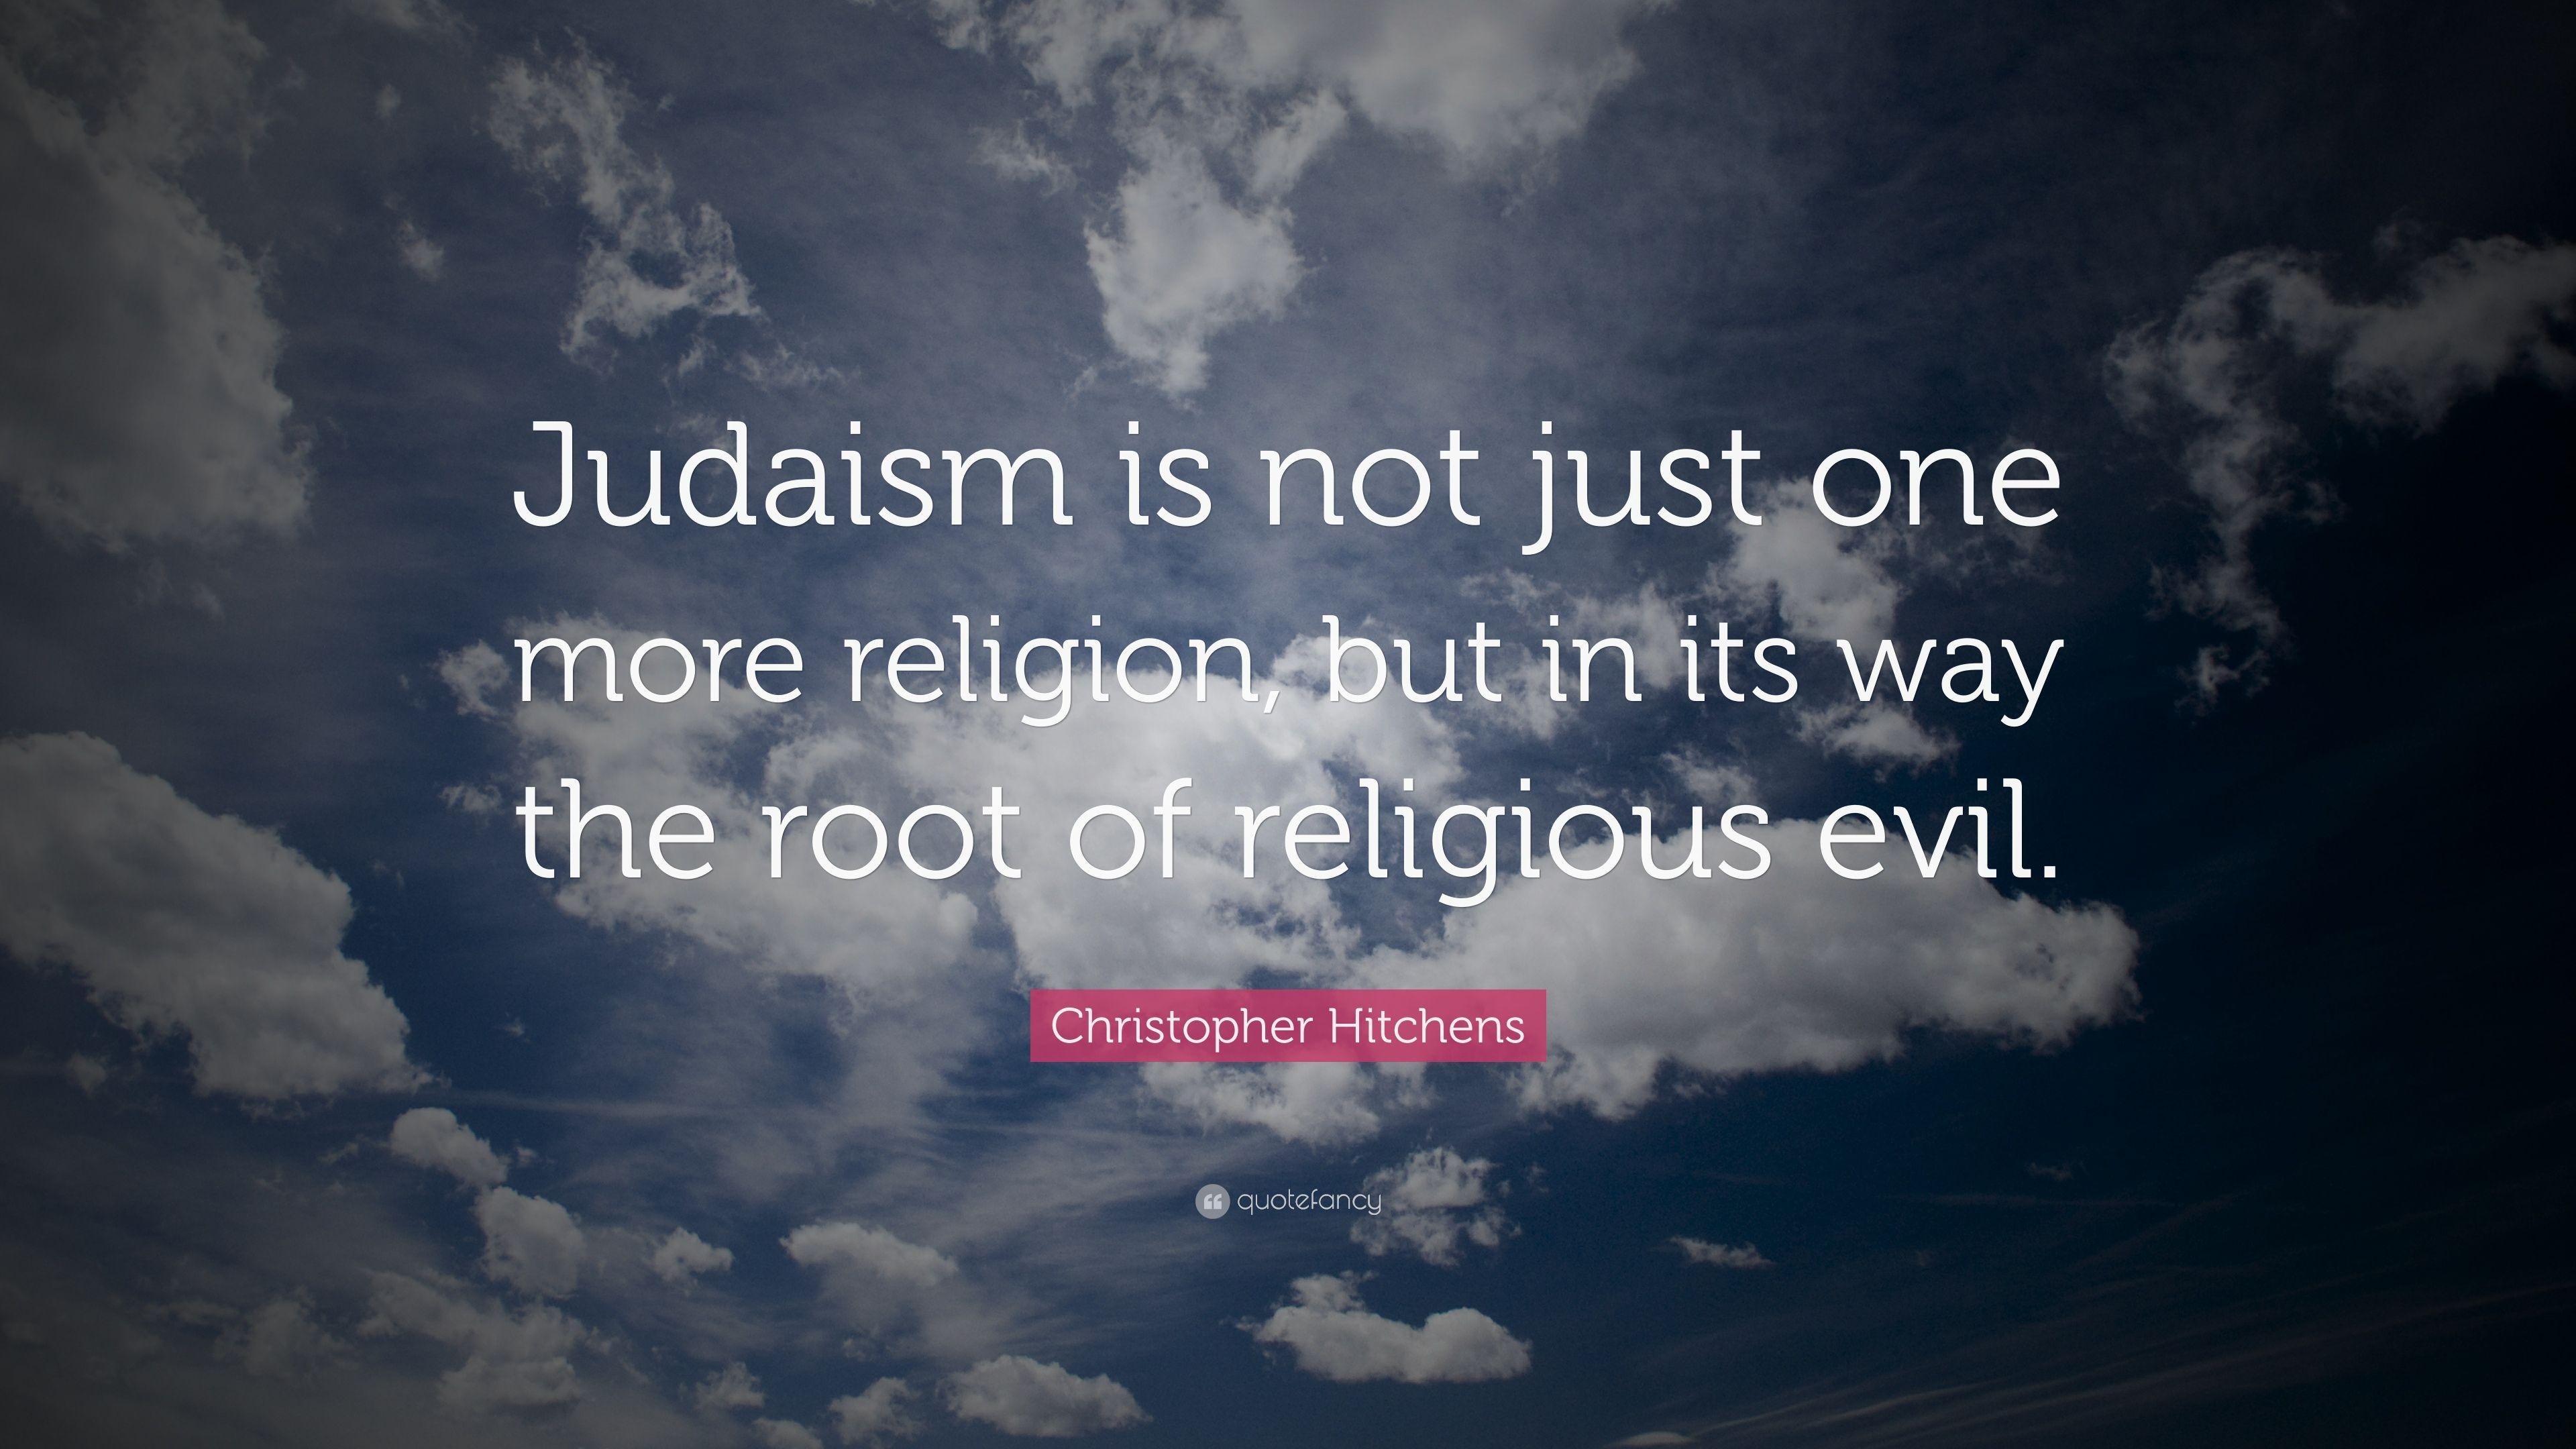 Christopher Hitchens Quote: “Judaism is not just one more religion